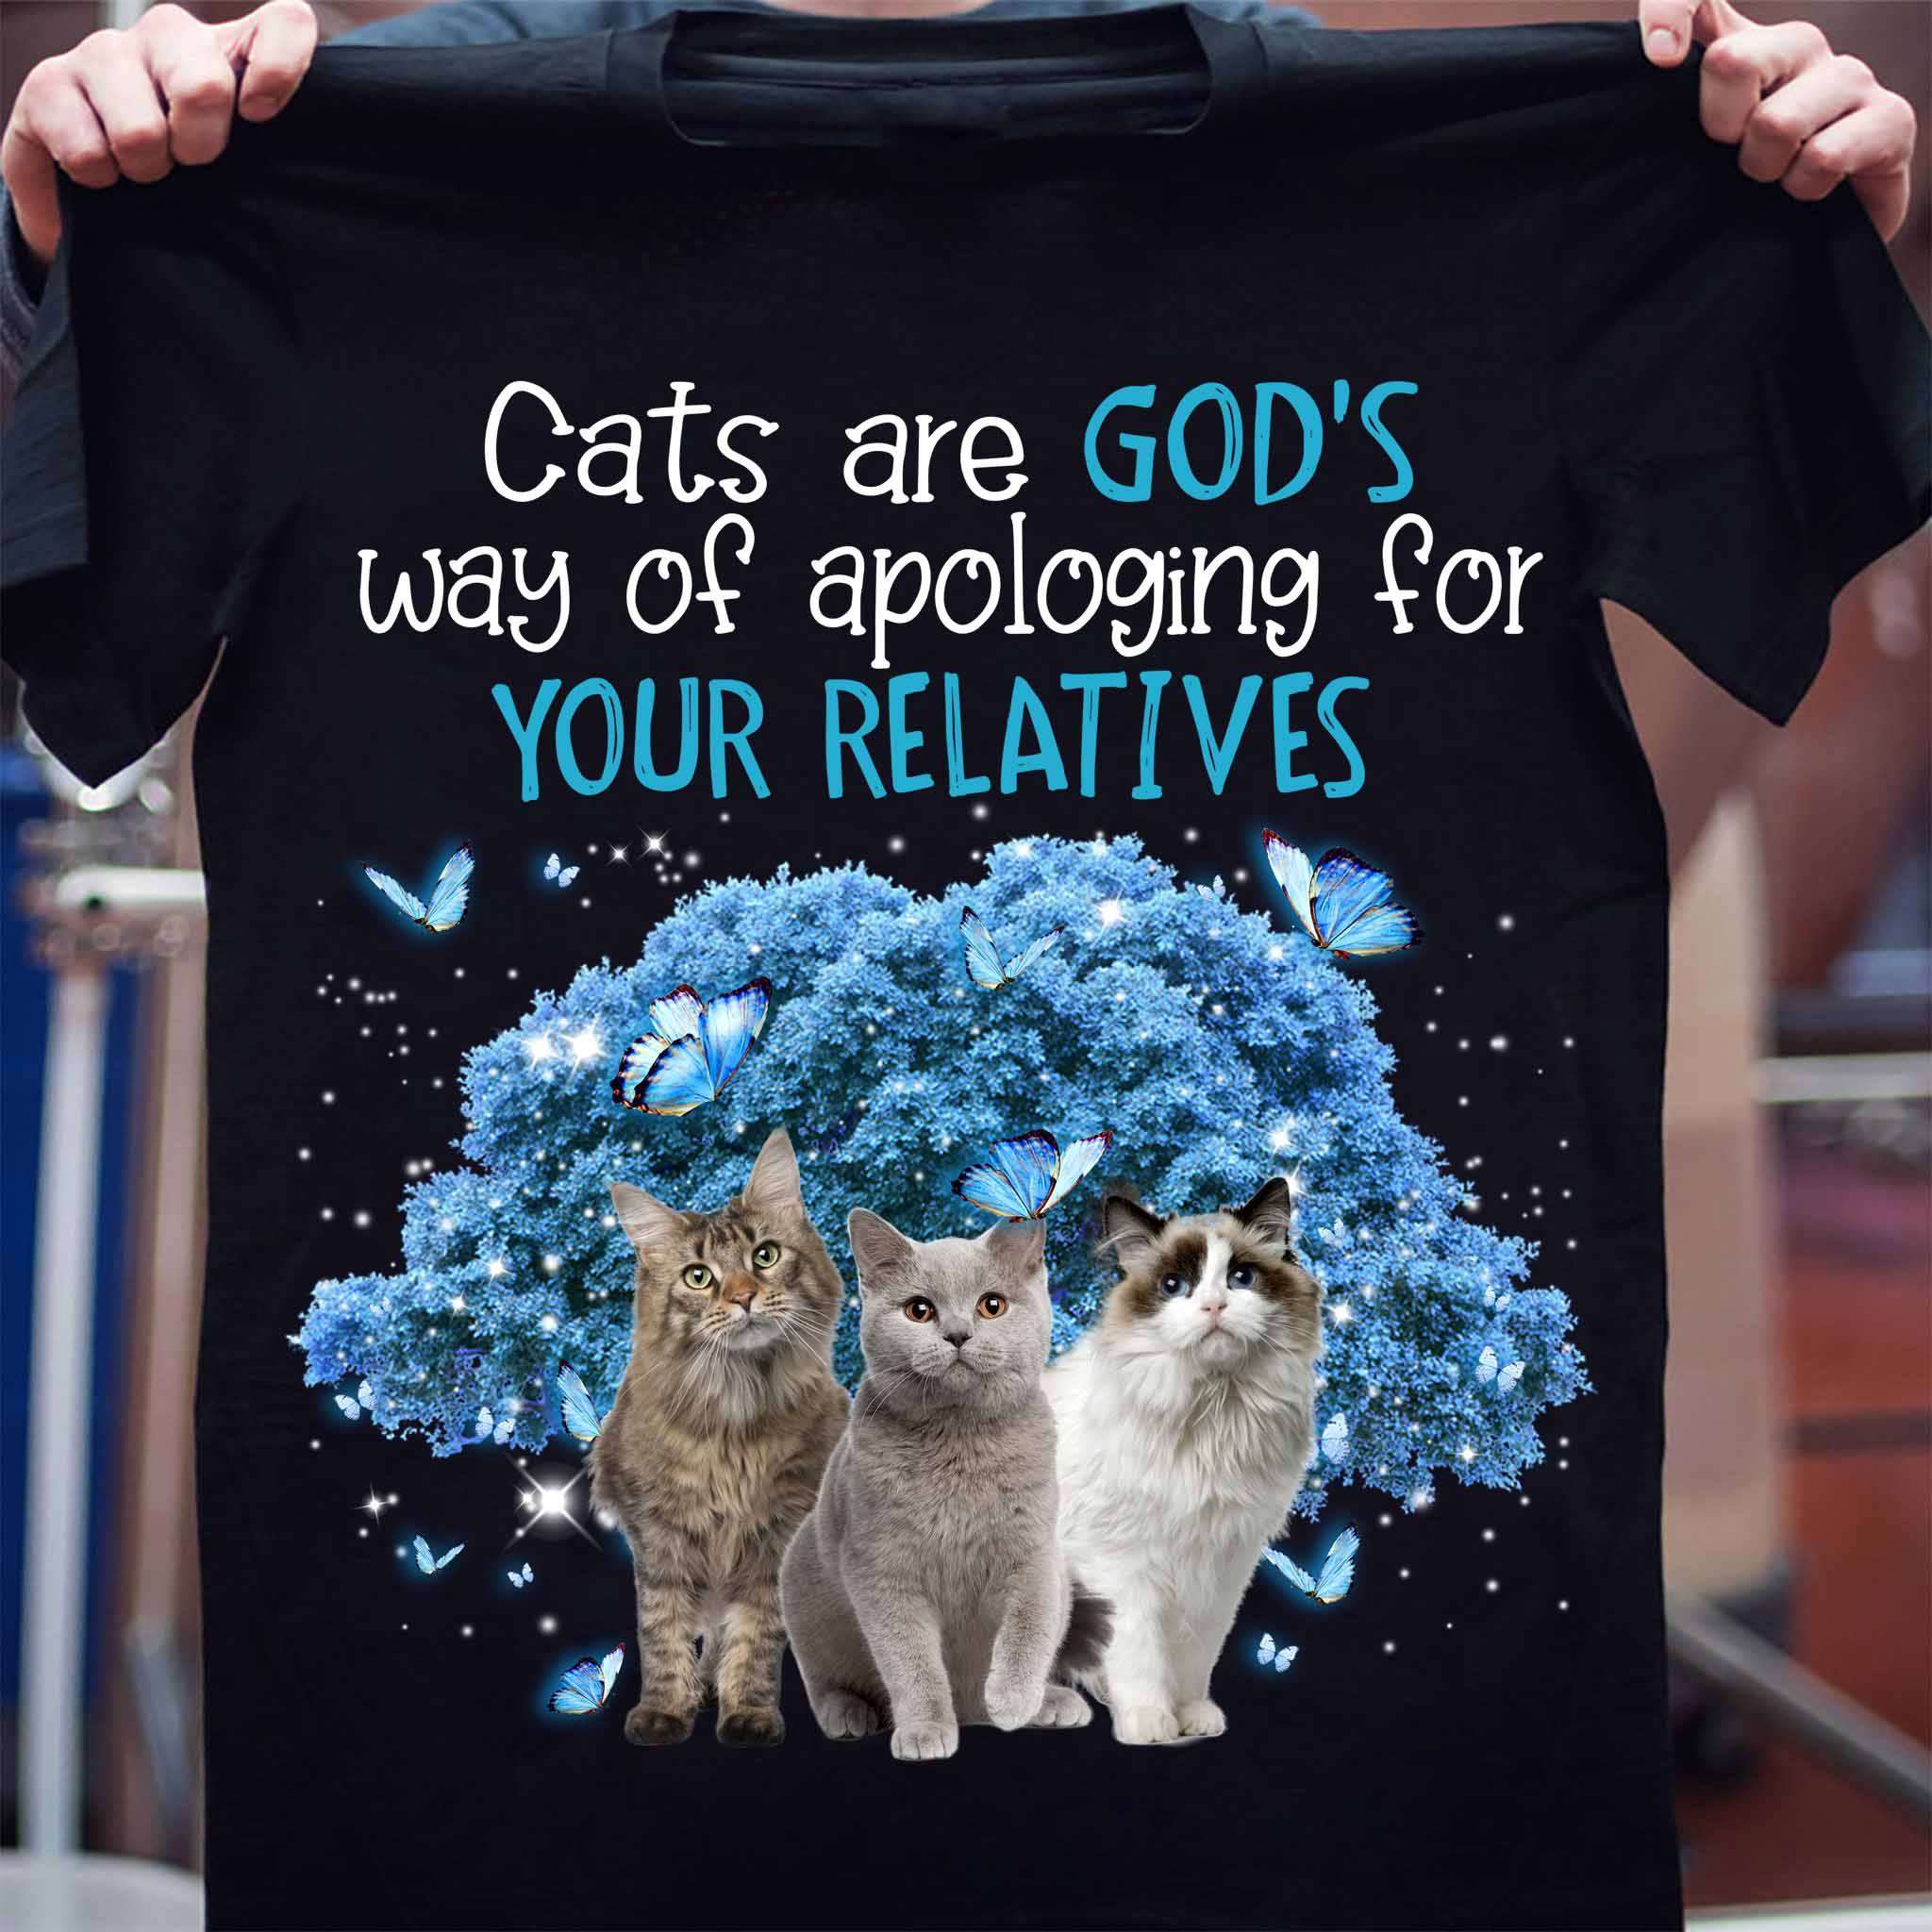 Cats are god's way of apologing for your relatives - Cat lover, Jesus the god